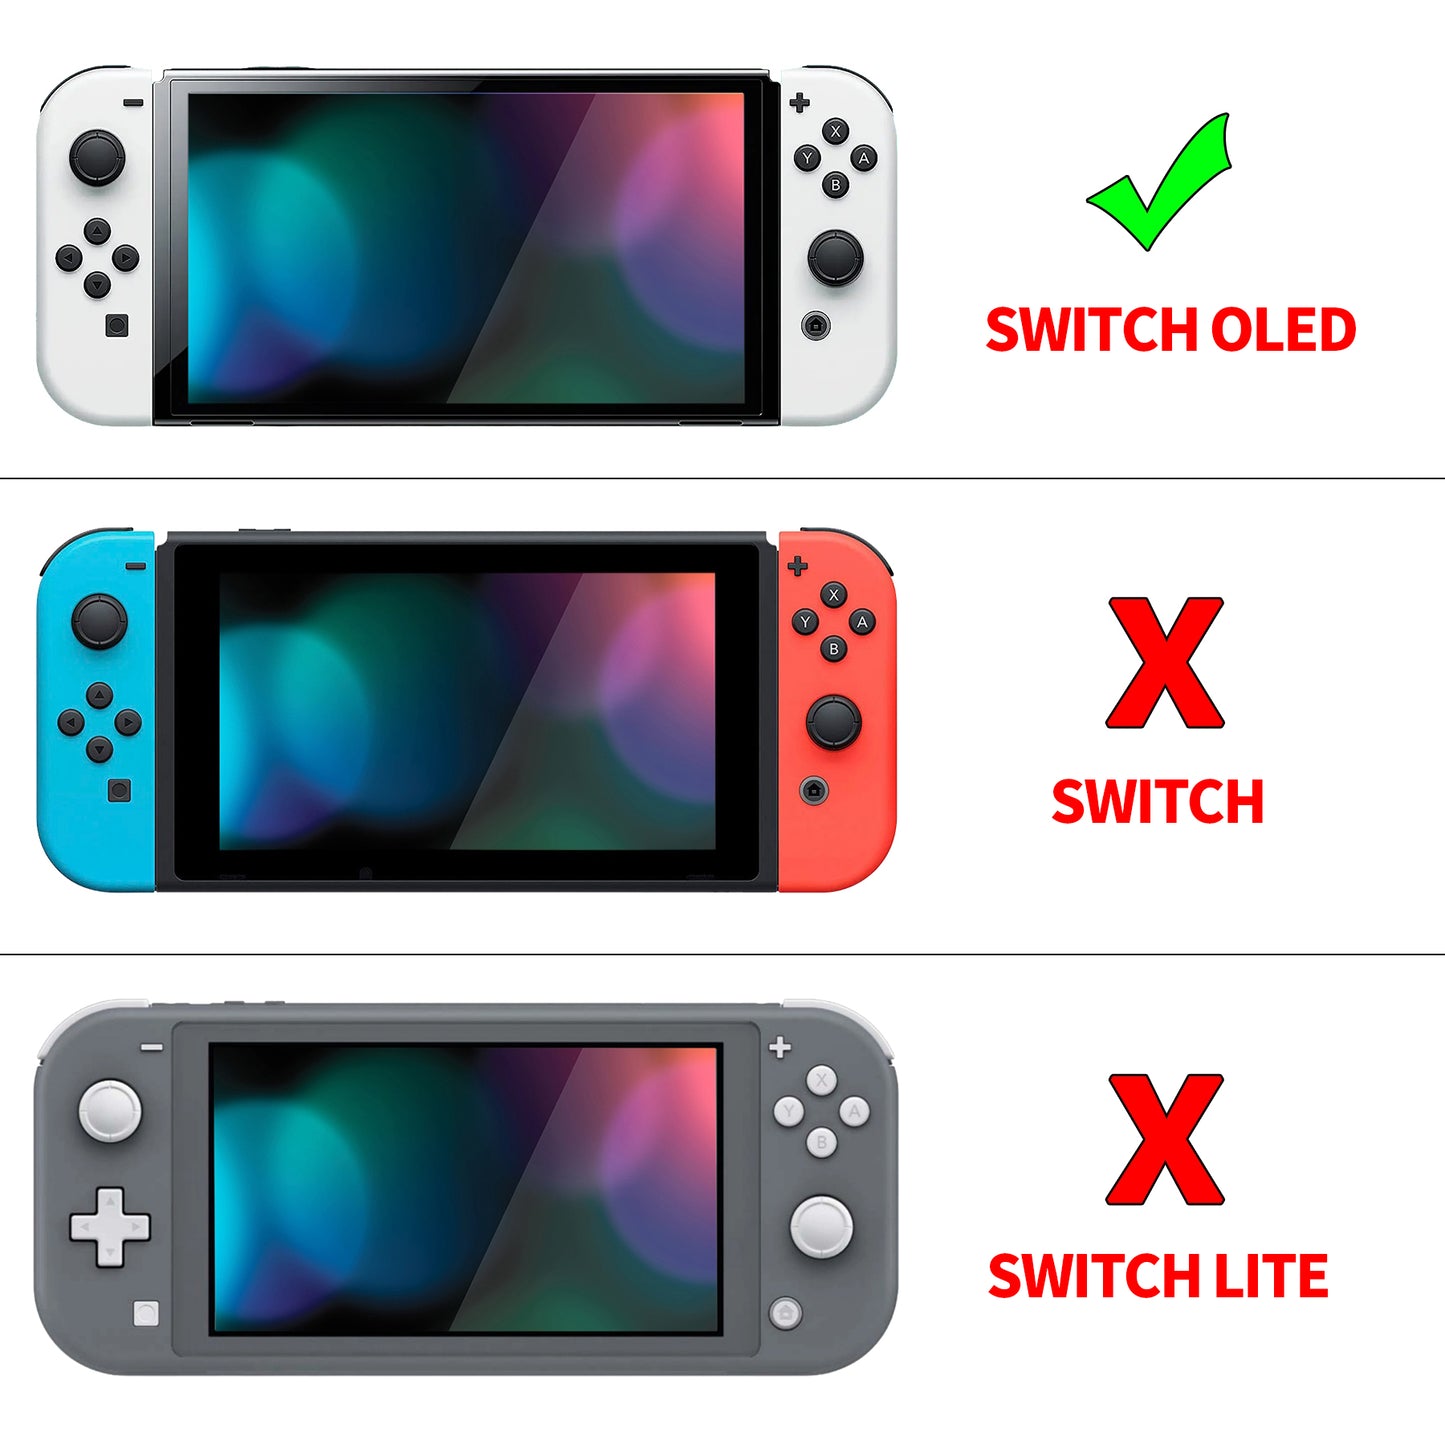 PlayVital ZealProtect Soft Protective Case for Switch OLED, Flexible Protector Joycon Grip Cover for Switch OLED with Thumb Grip Caps & ABXY Direction Button Caps - Hot Spring Kitties - XSOYV6038 playvital